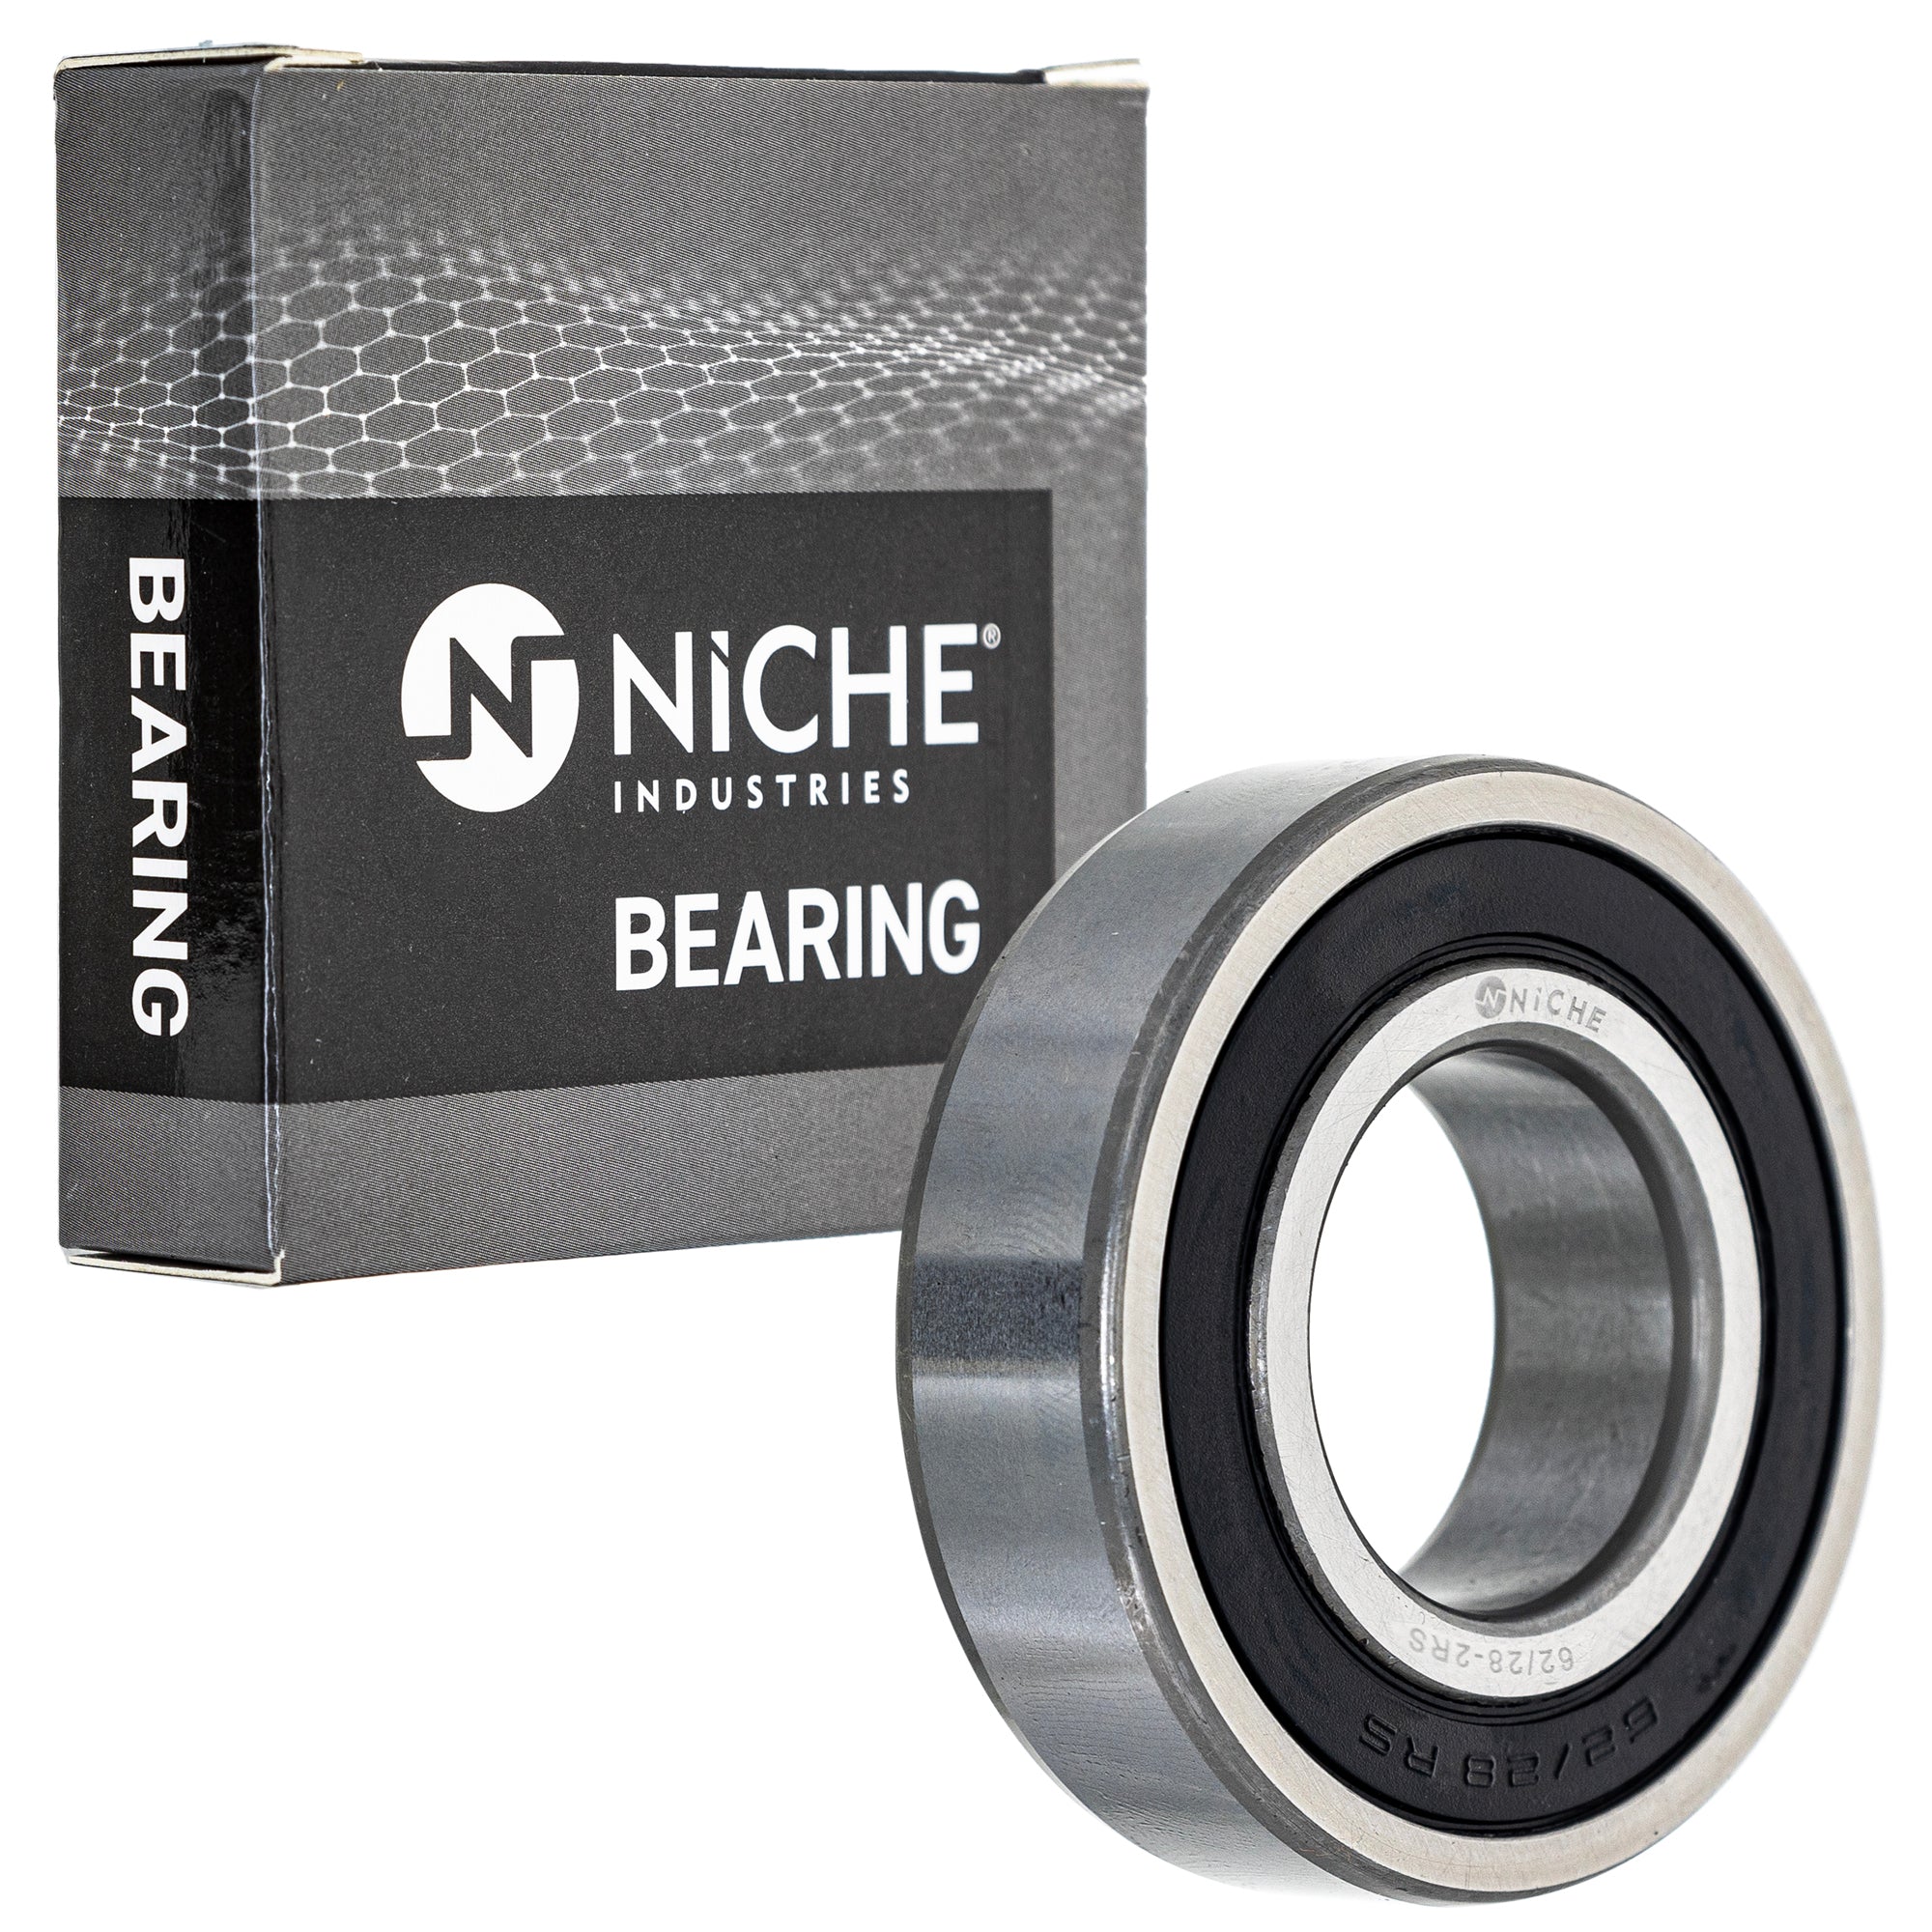 NICHE 519-CBB2235R Bearing 10-Pack for zOTHER Rancher FourTrax